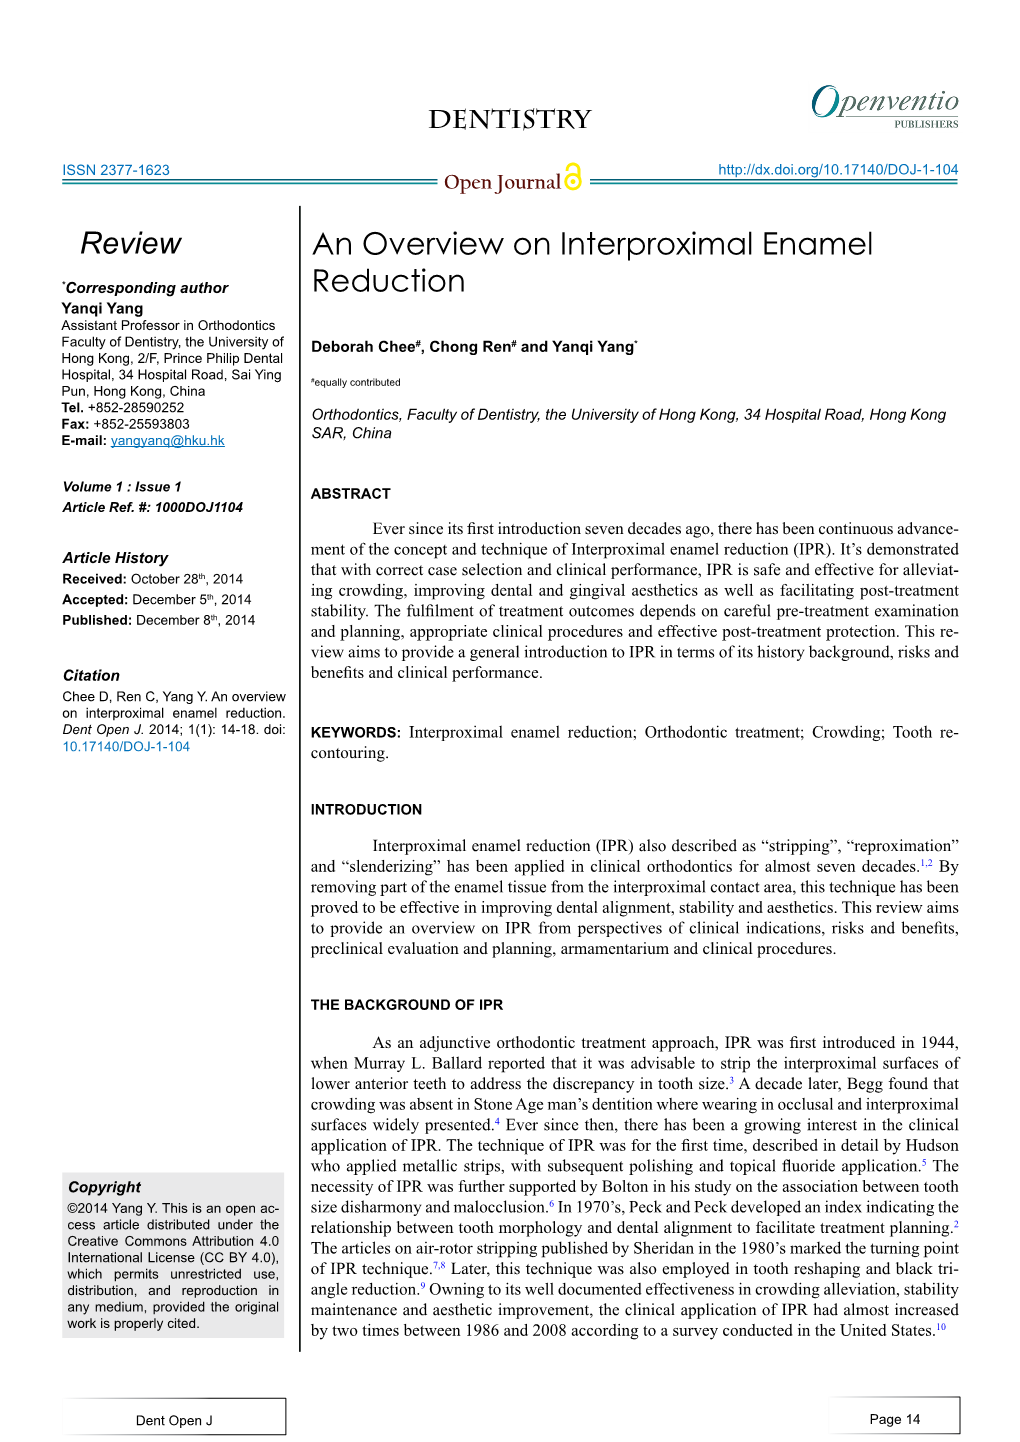 An Overview on Interproximal Enamel Reduction Review